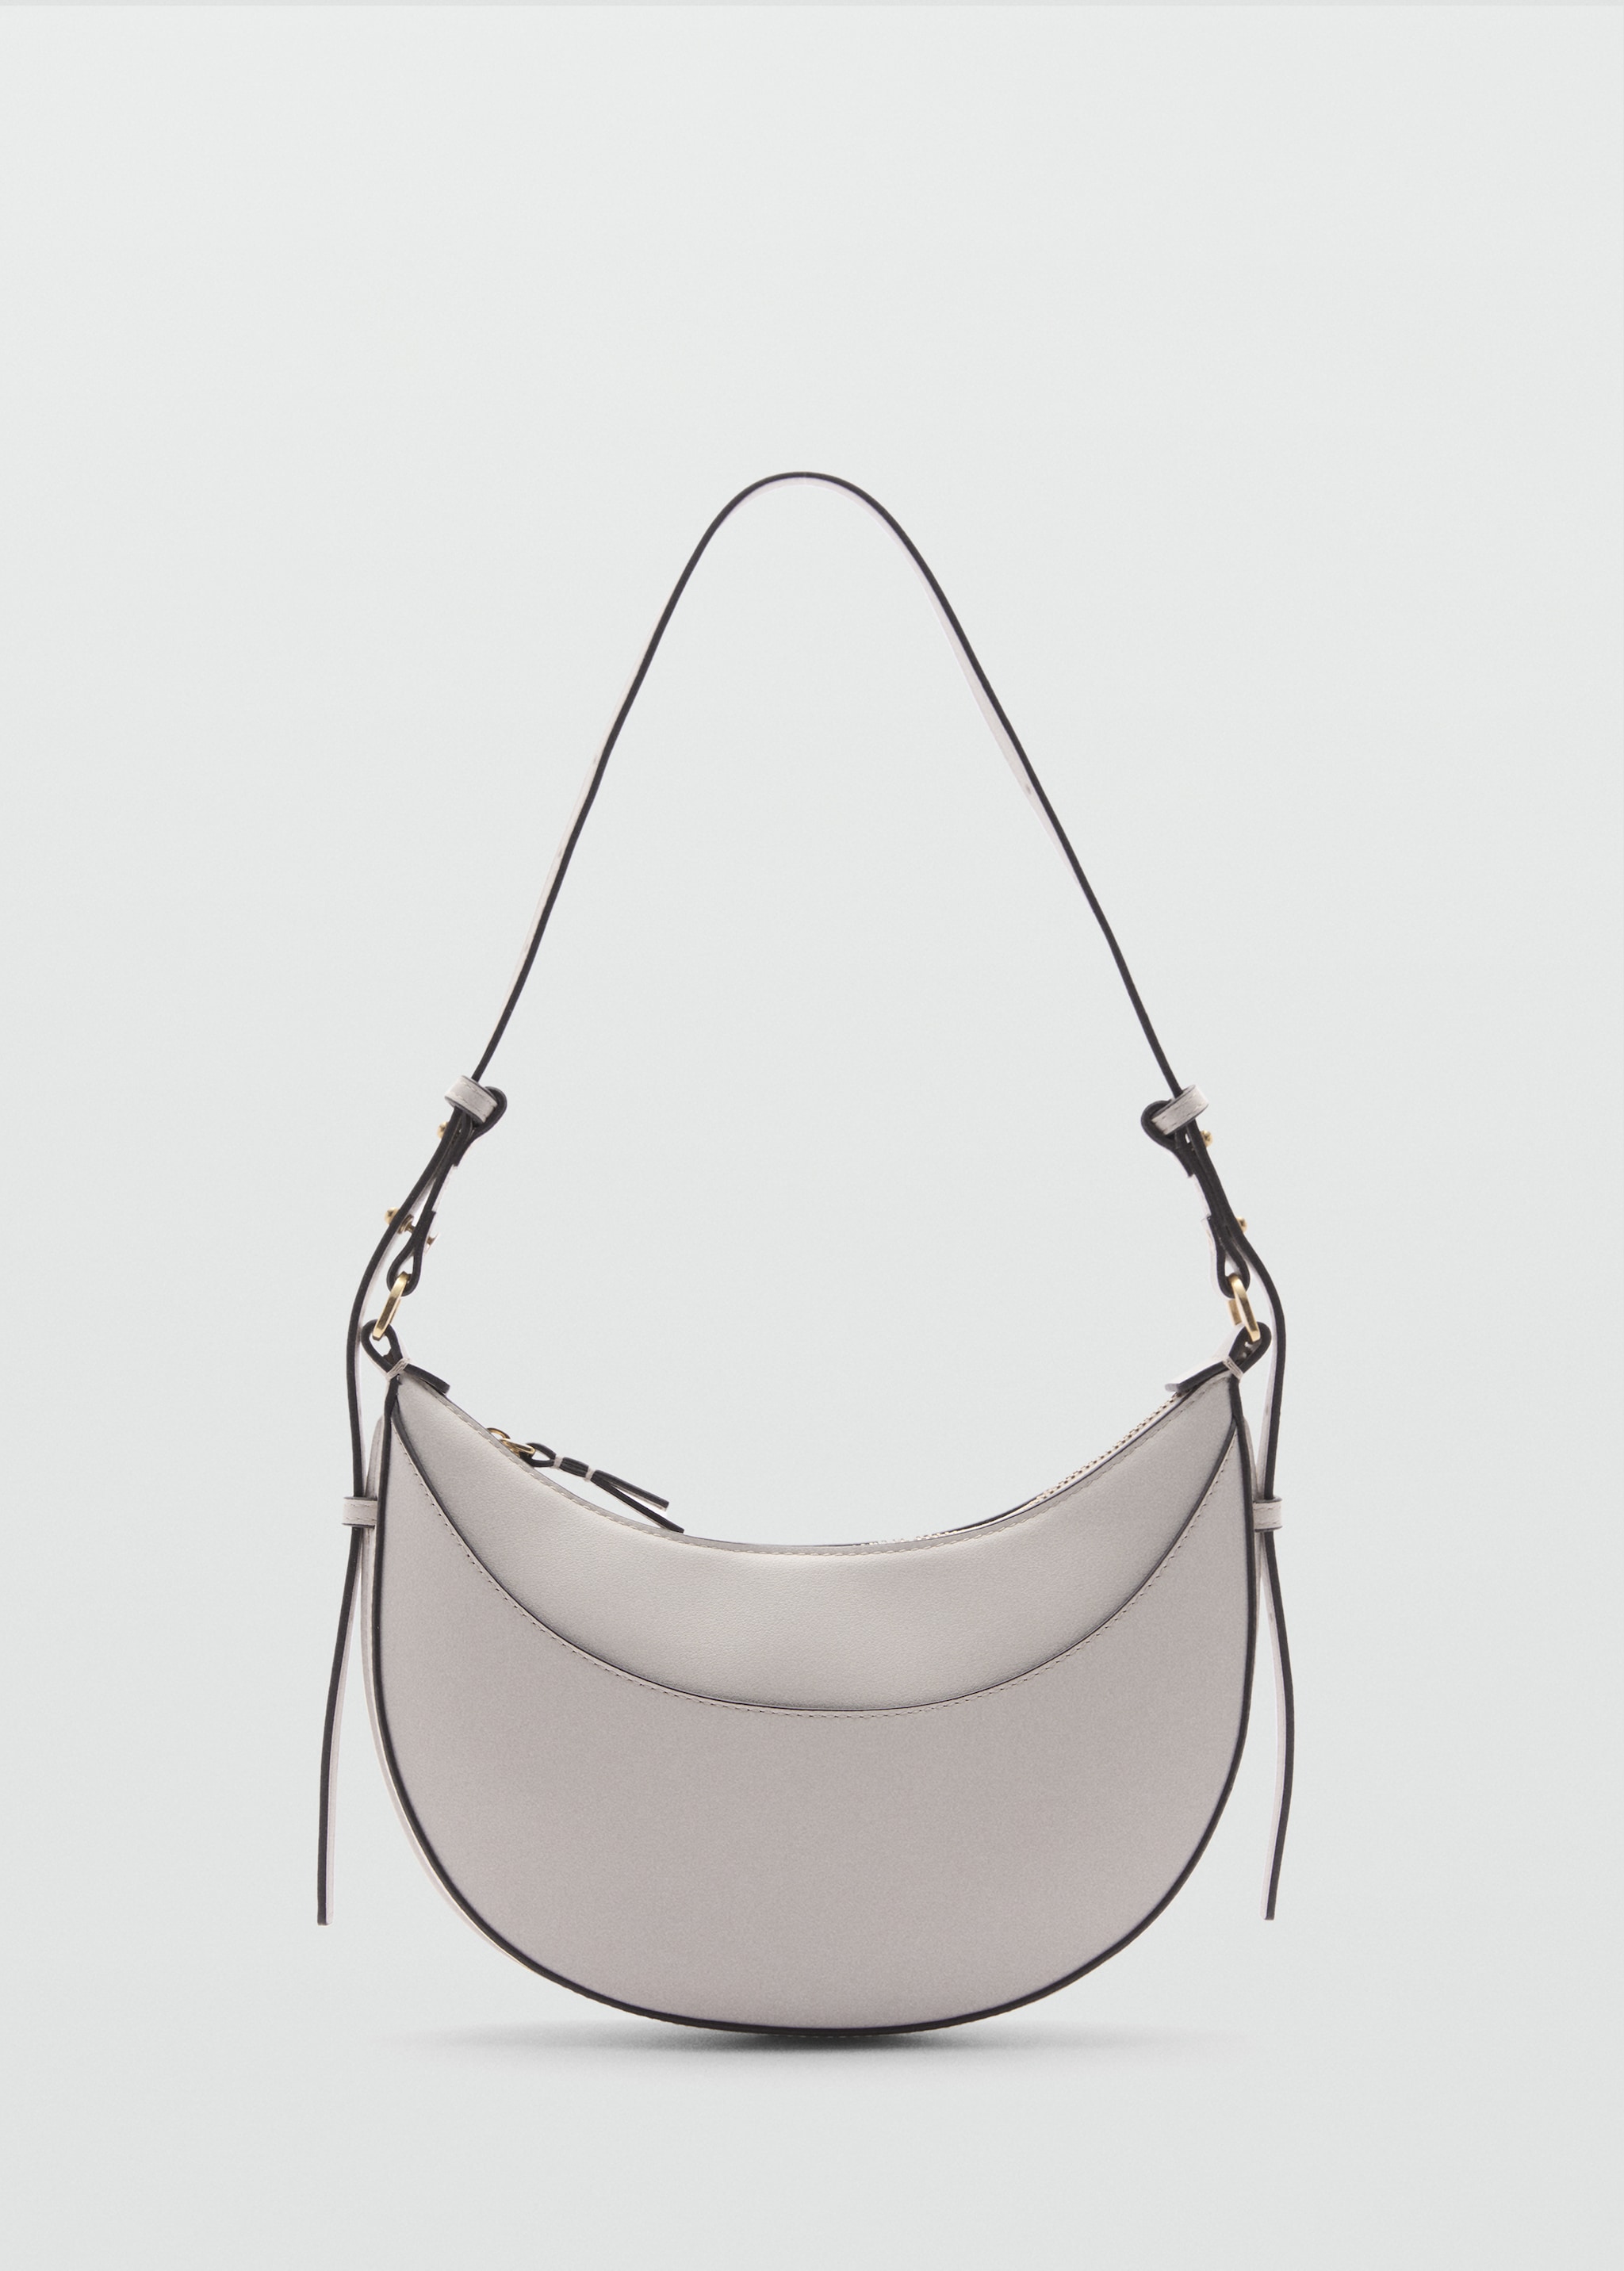 Oval short handle bag - Article without model